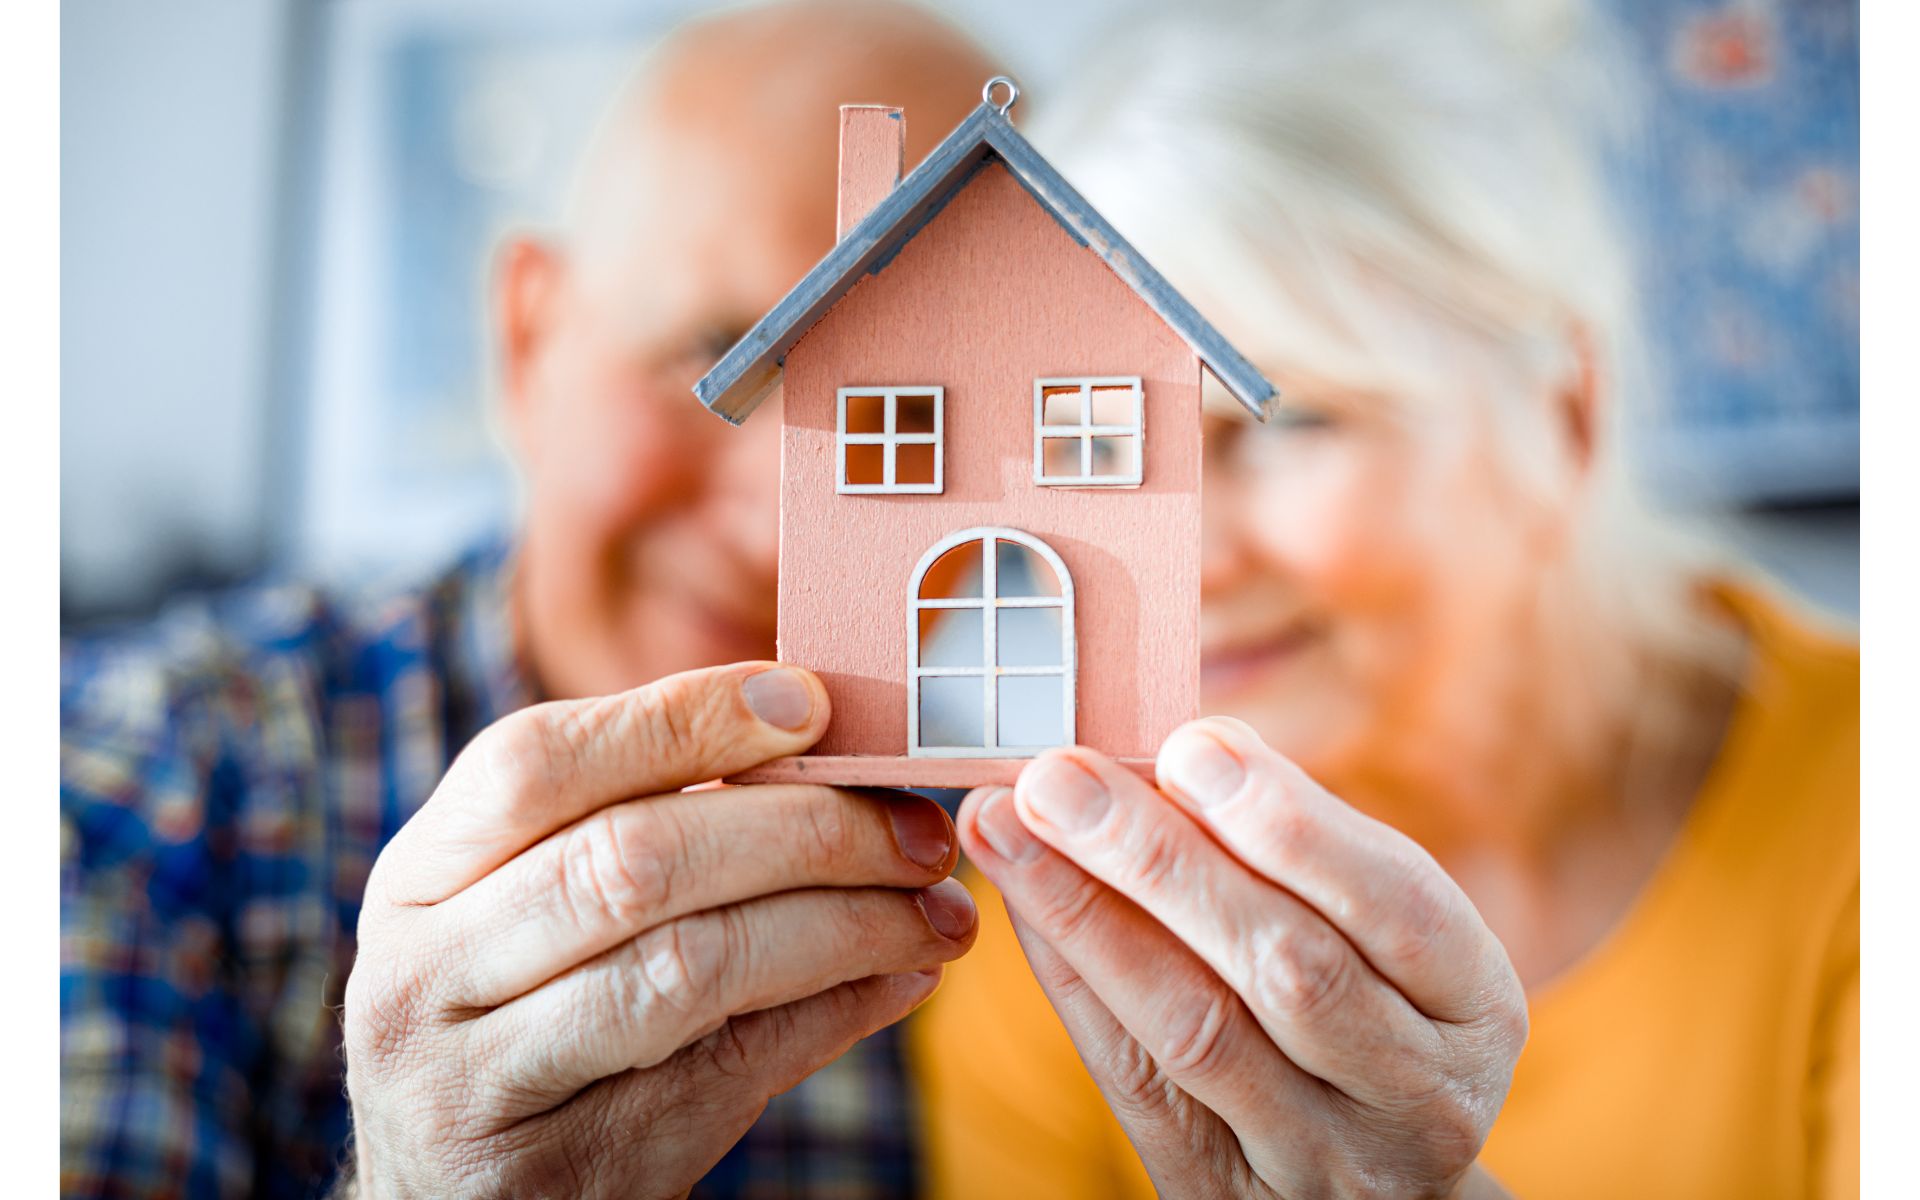 An older couple holding a model house. Cover image for article on aging in place.